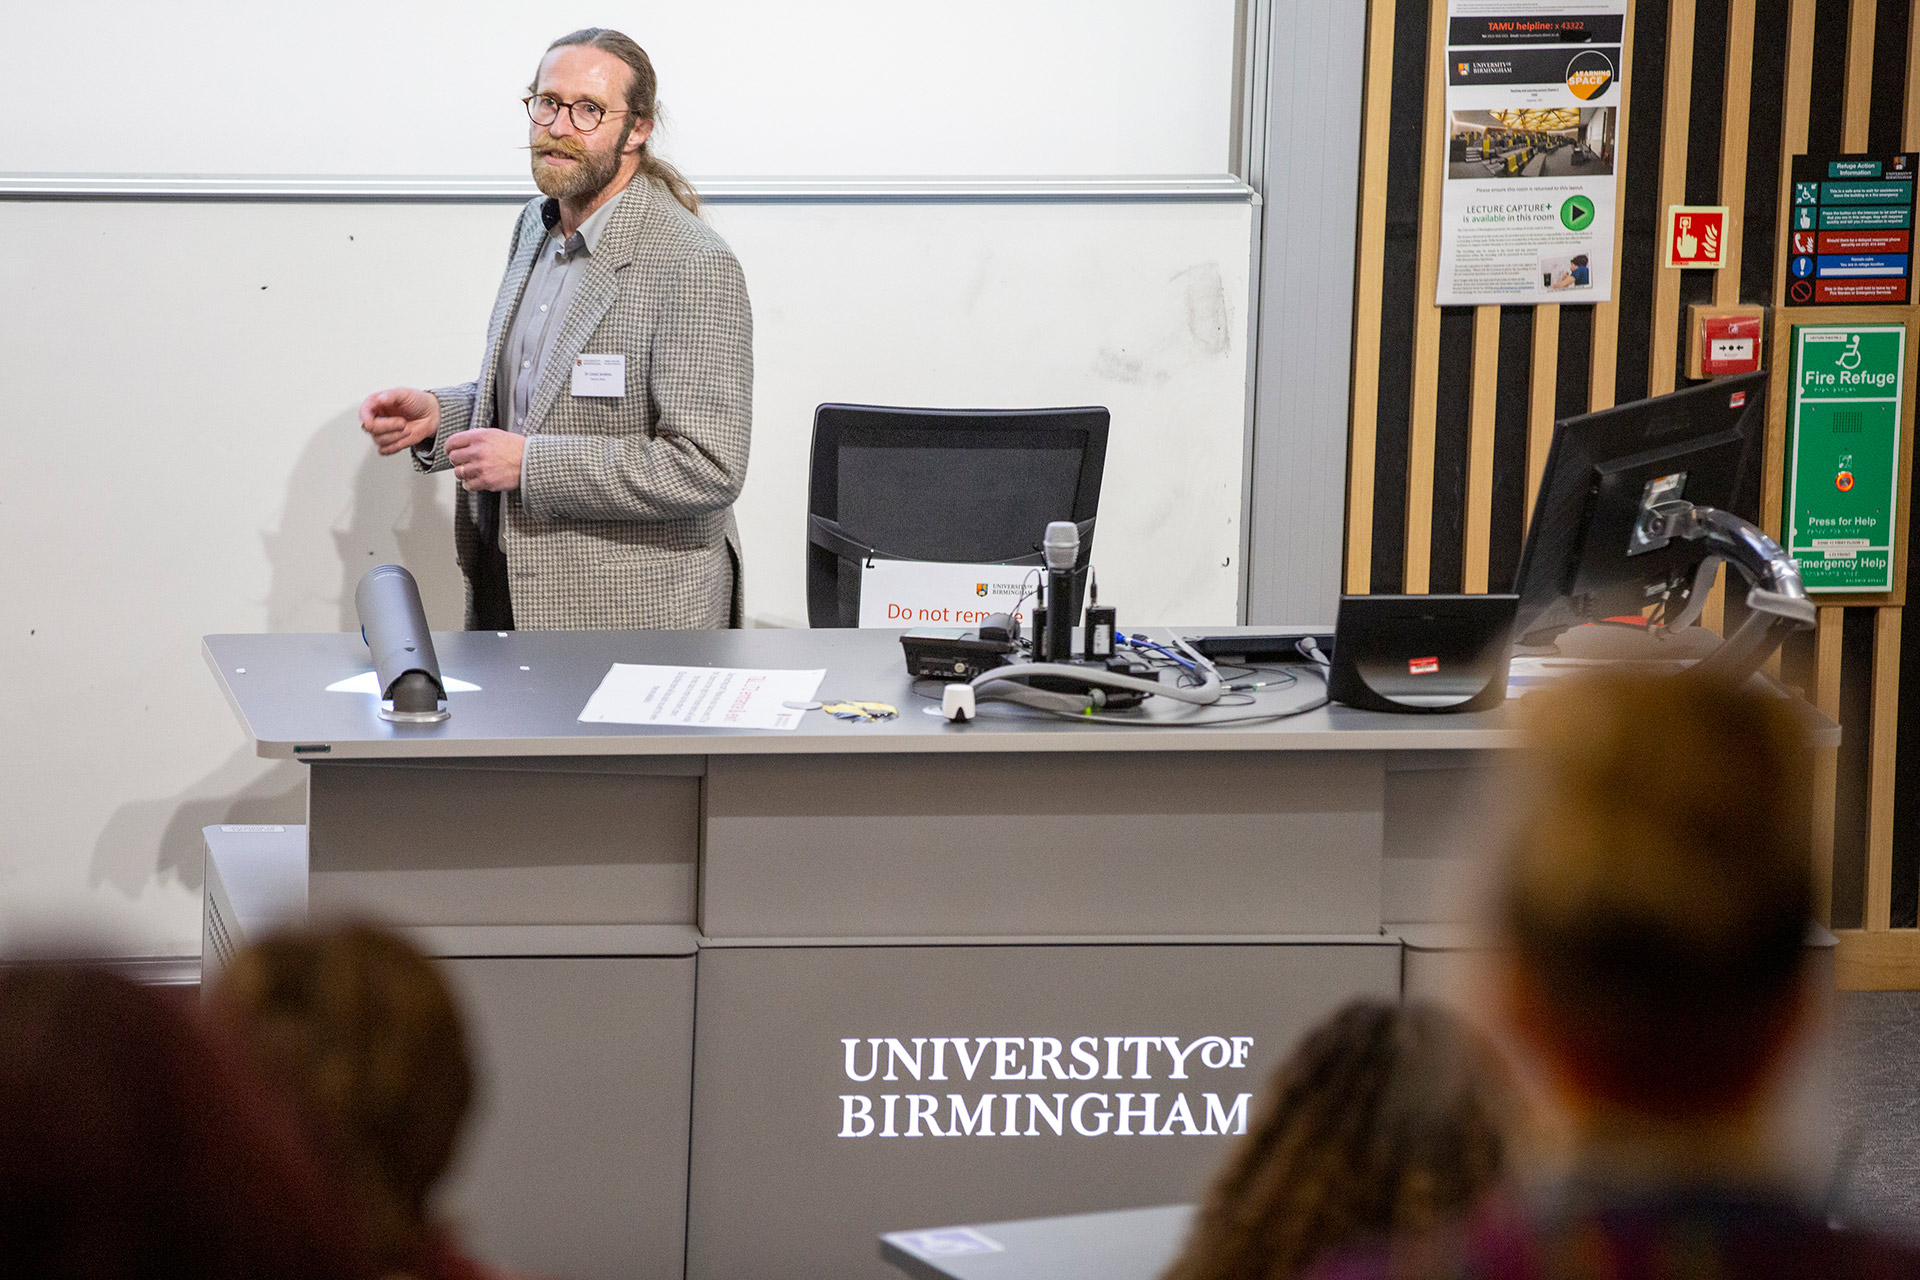 A Liberal Arts and Sciences lecture at the University of Birmingham